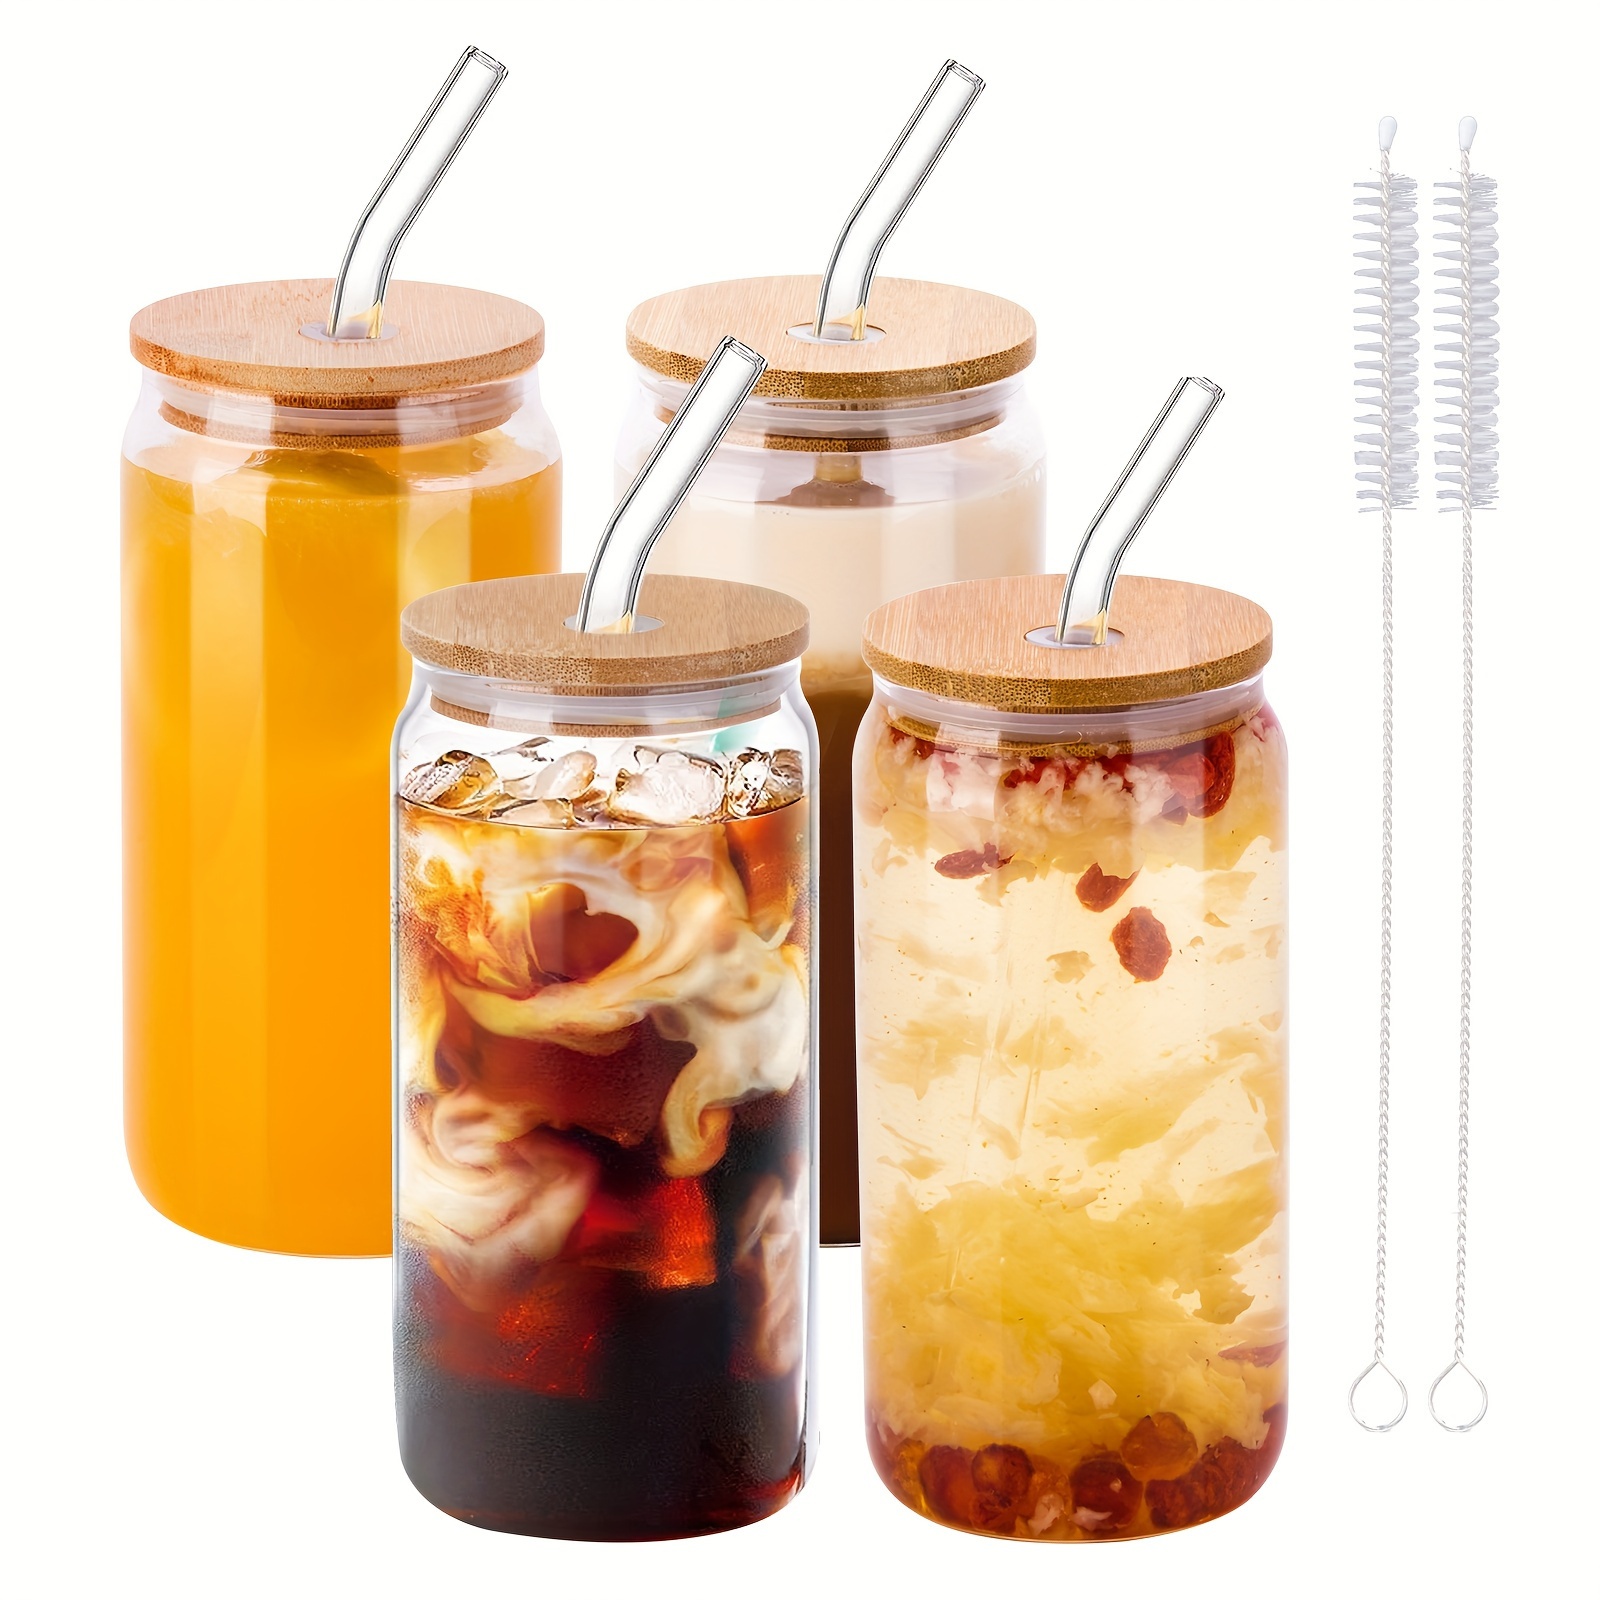  6 Pack Beer Coffee Glasses with Bamboo Lids and Glass Straws,  16oz Iced Coffee Cups, Can Shape Glass Cups, Drinking Glasses with Lids and  Straws, Beer Glasses, Ideal for Water, Soda